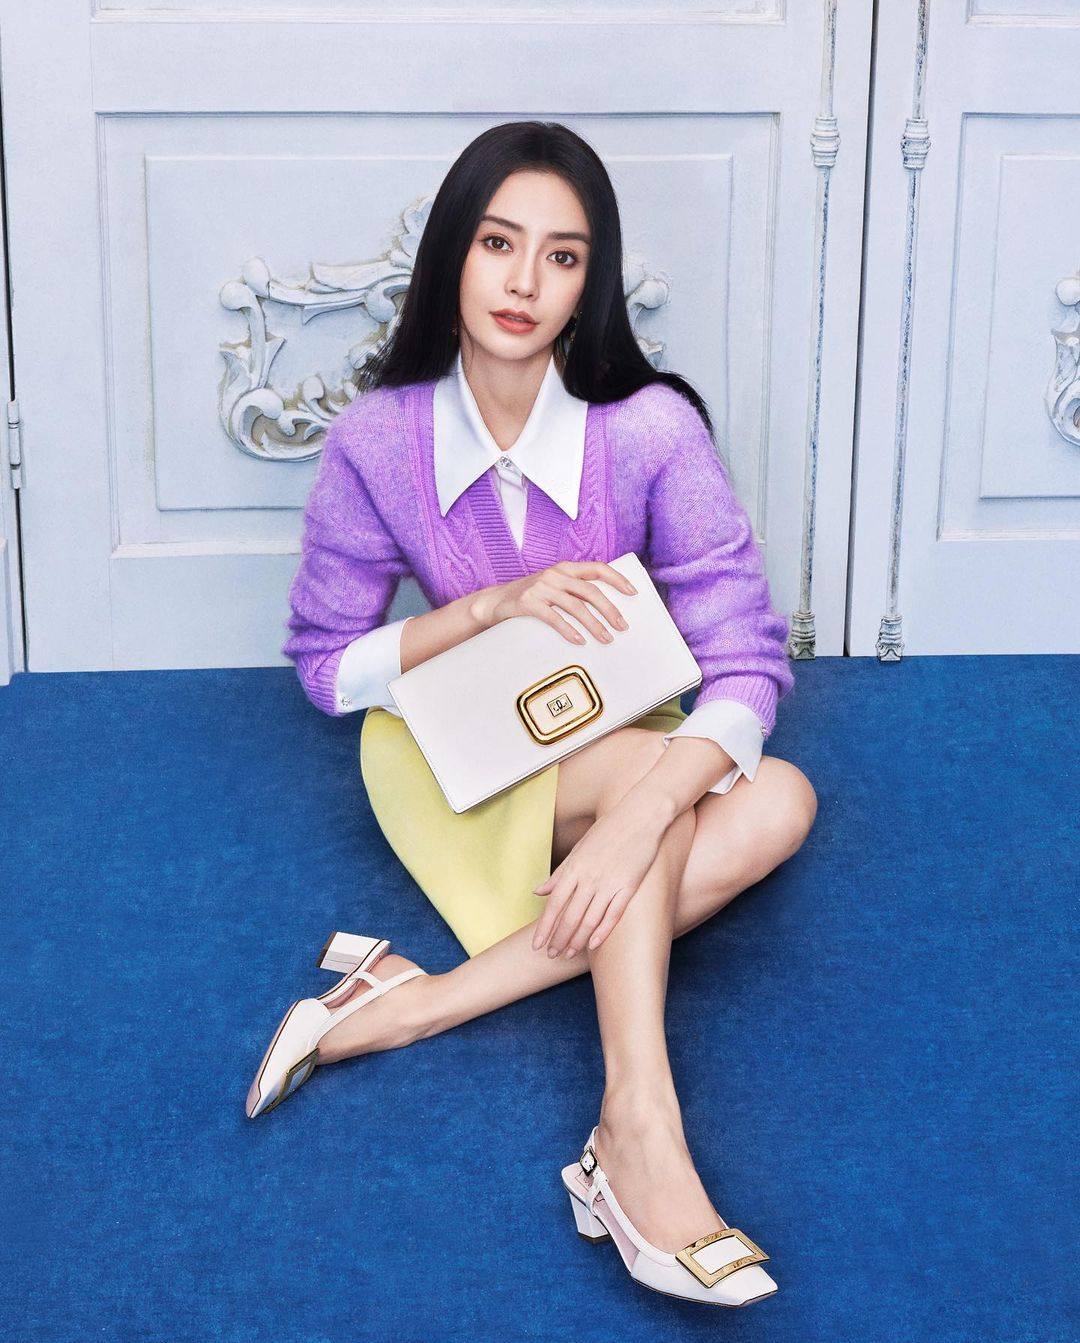 Is Chinese star Angelababy making a comeback after her Weibo ban? Photo: @angelababyct/Instagram